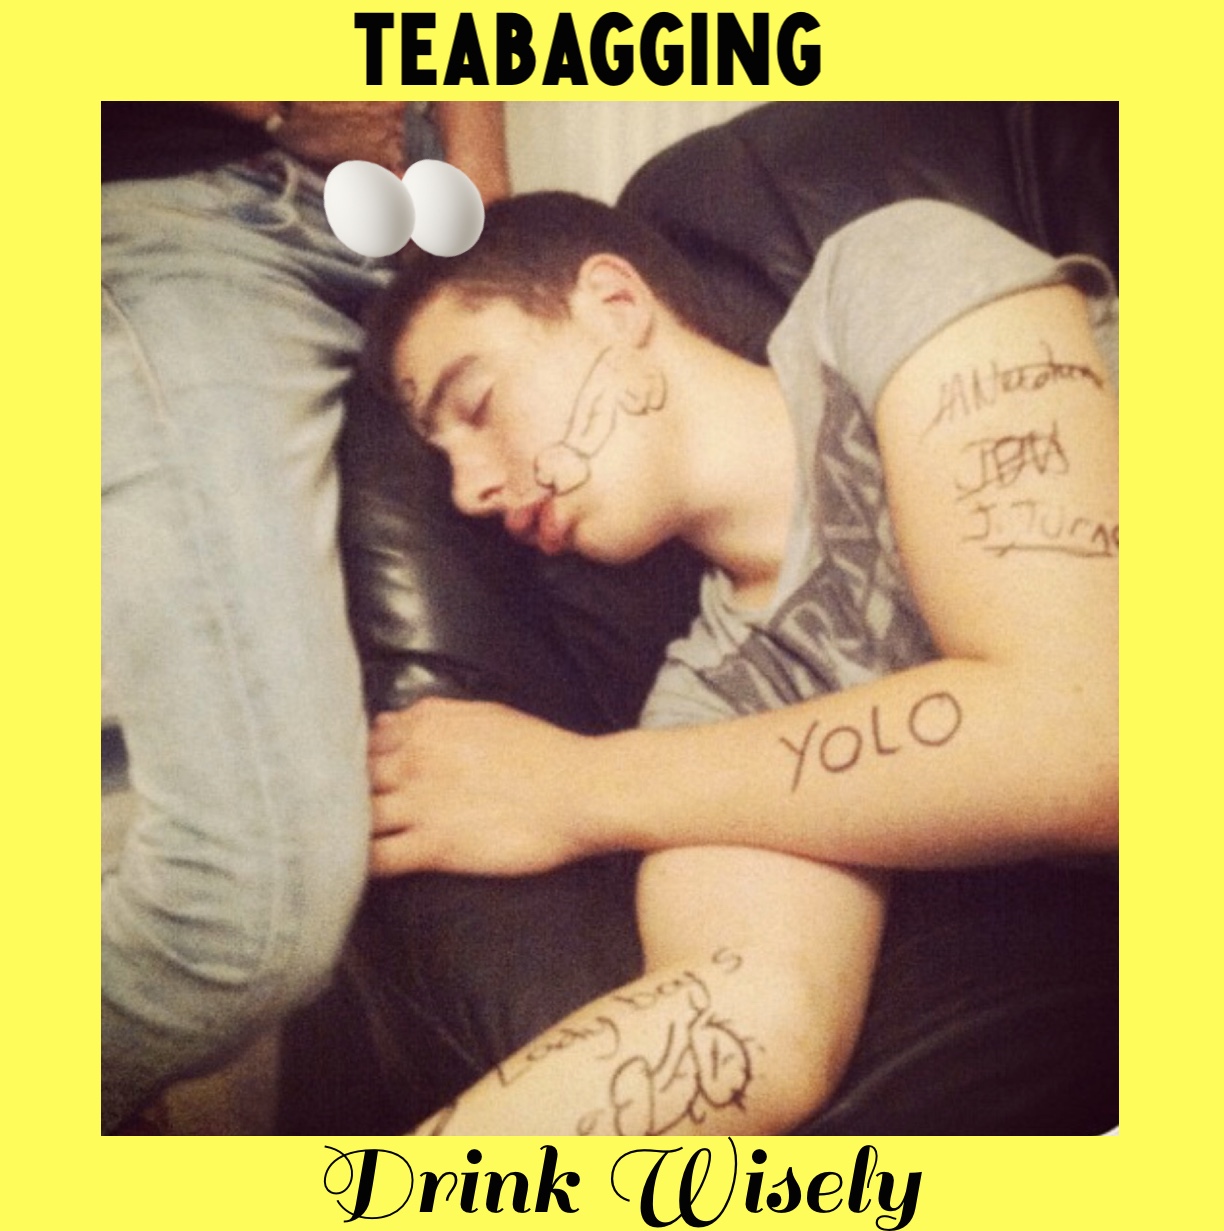 photo caption - Teabagging Yolo Drink Wisely